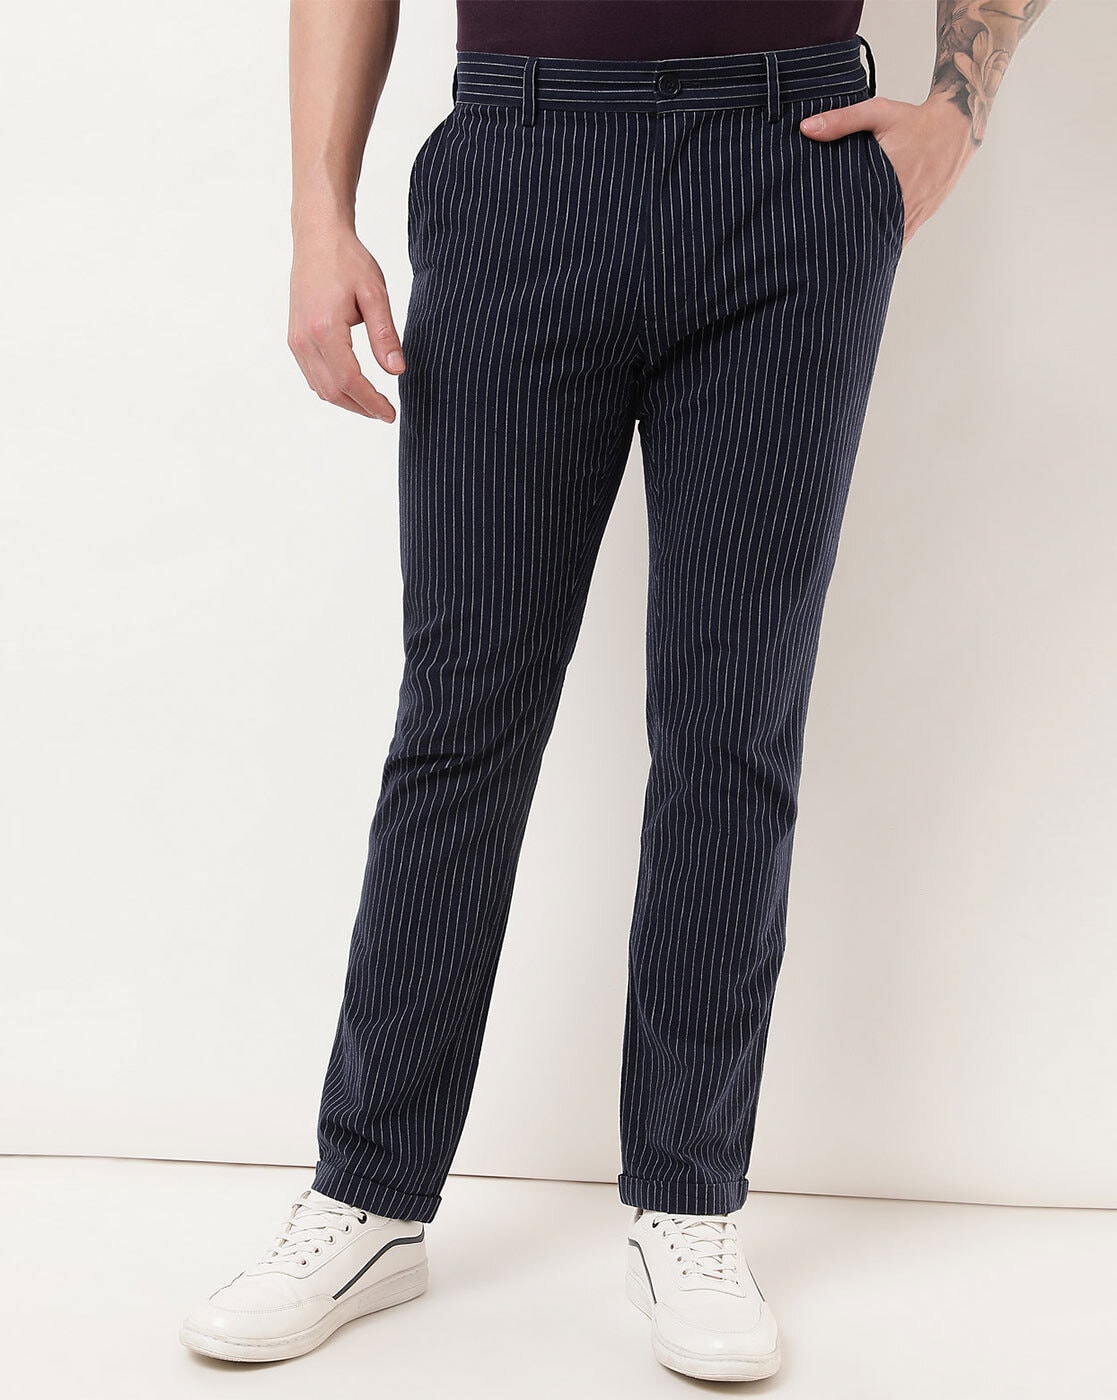 Fifties Mens Trousers Black with White Pinstripe Retro Vintage Stly Men  Chino Casual Fabric Pants, Model Swing Size 48/34 : Amazon.co.uk: Fashion